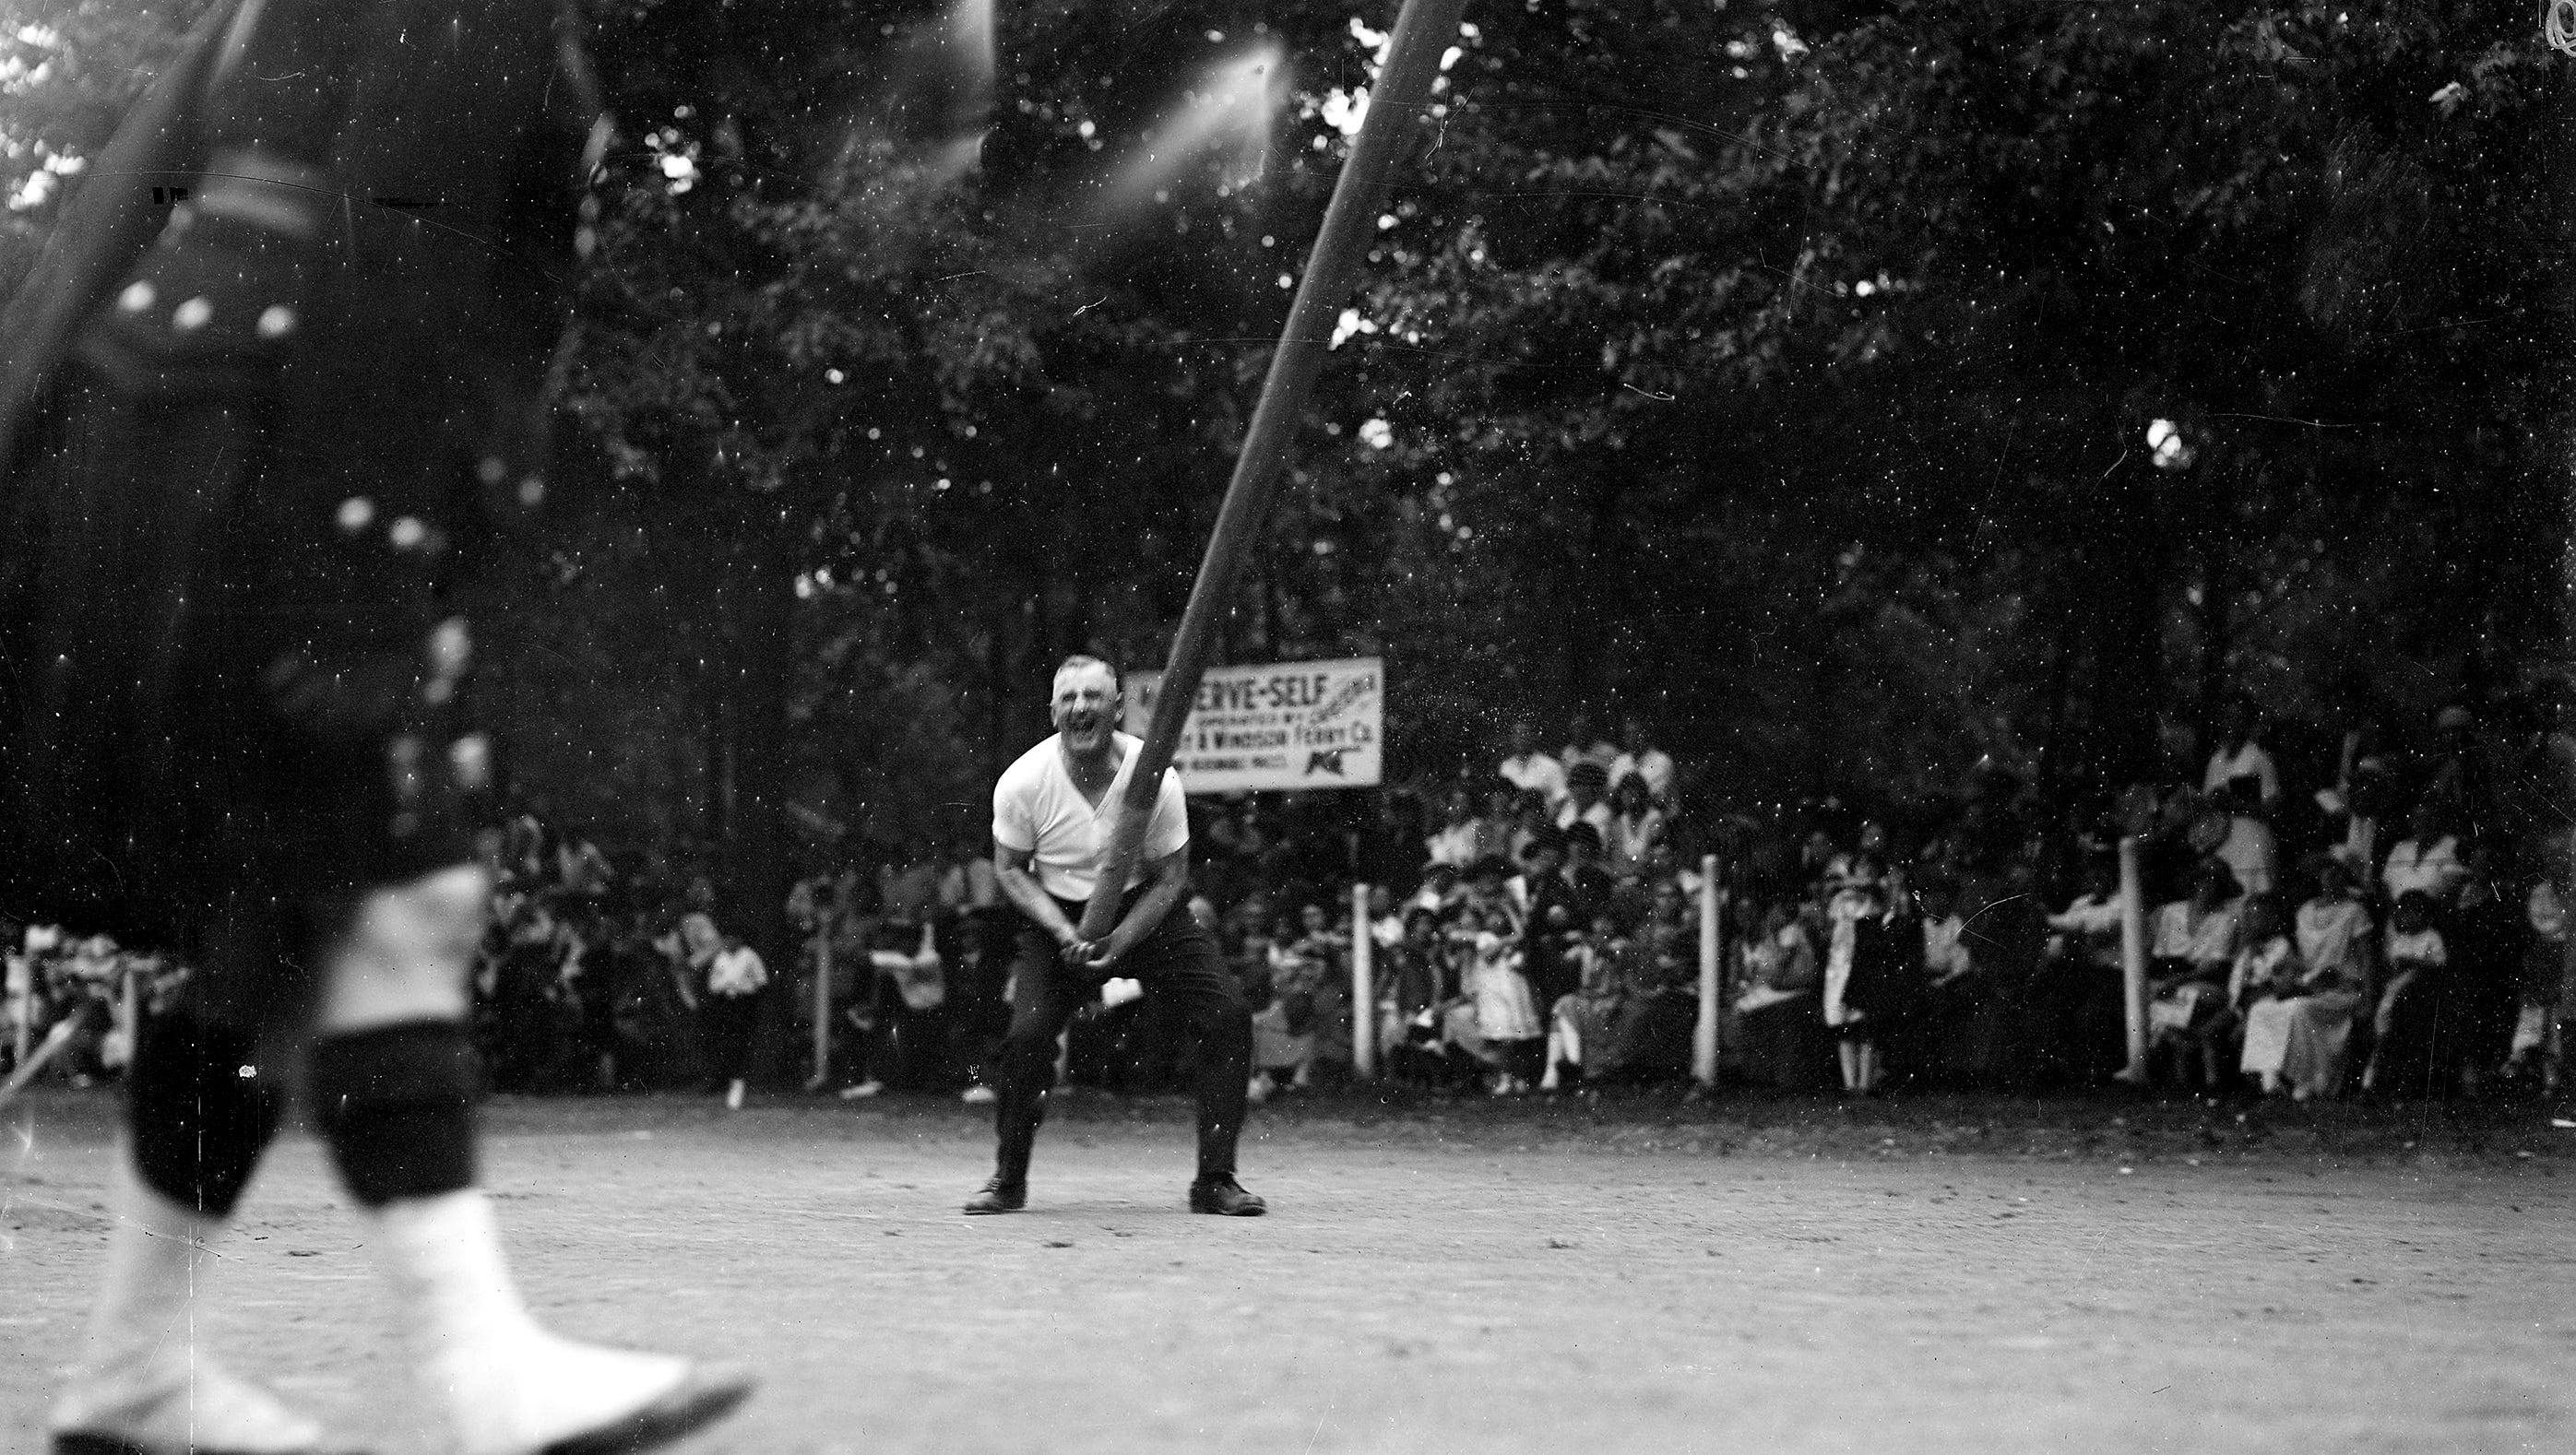 In a Scottish test of strength, a man tosses a caber at a St. Andrew's Society picnic on Boblo in the 1920s.